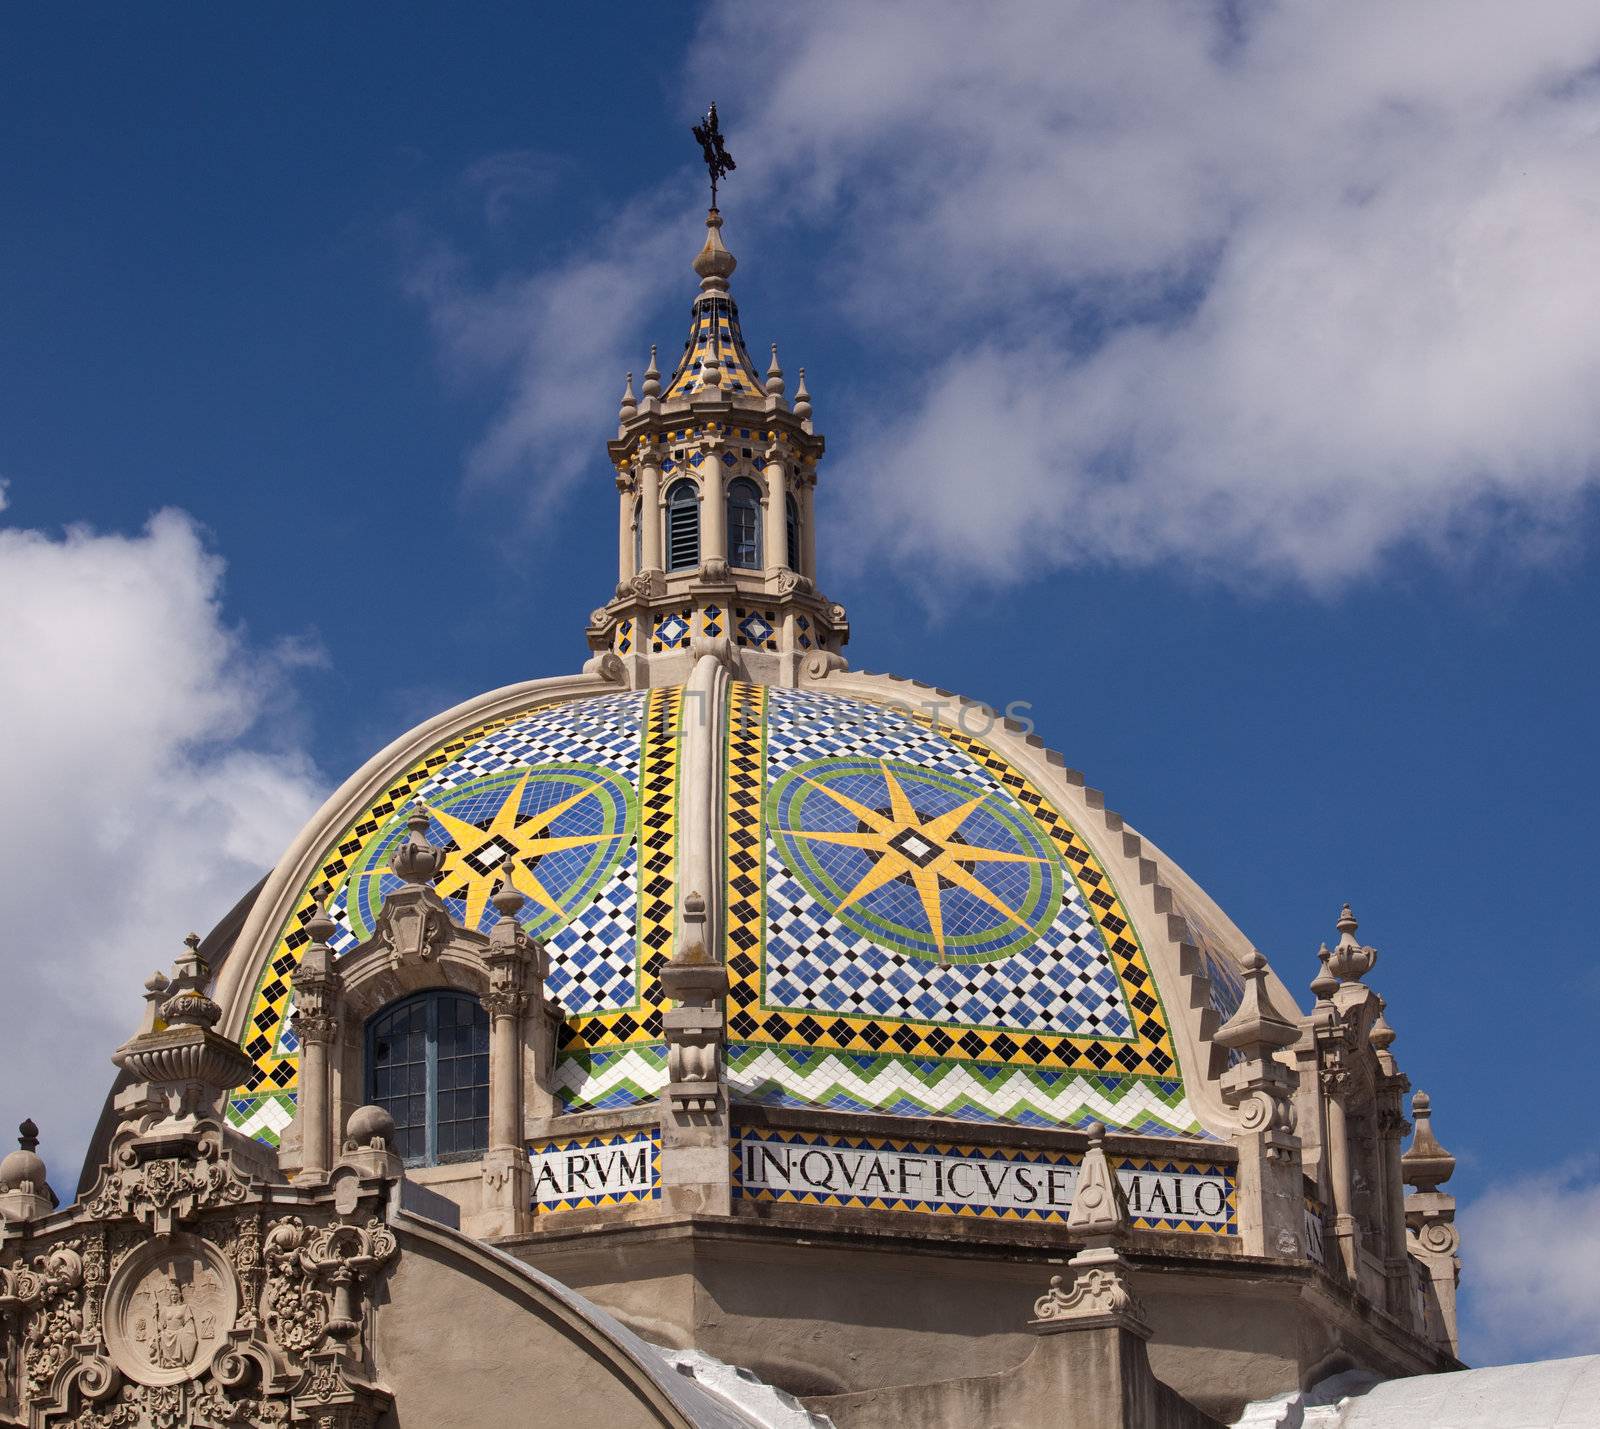 Dome by California Tower in Balboa Park by steheap